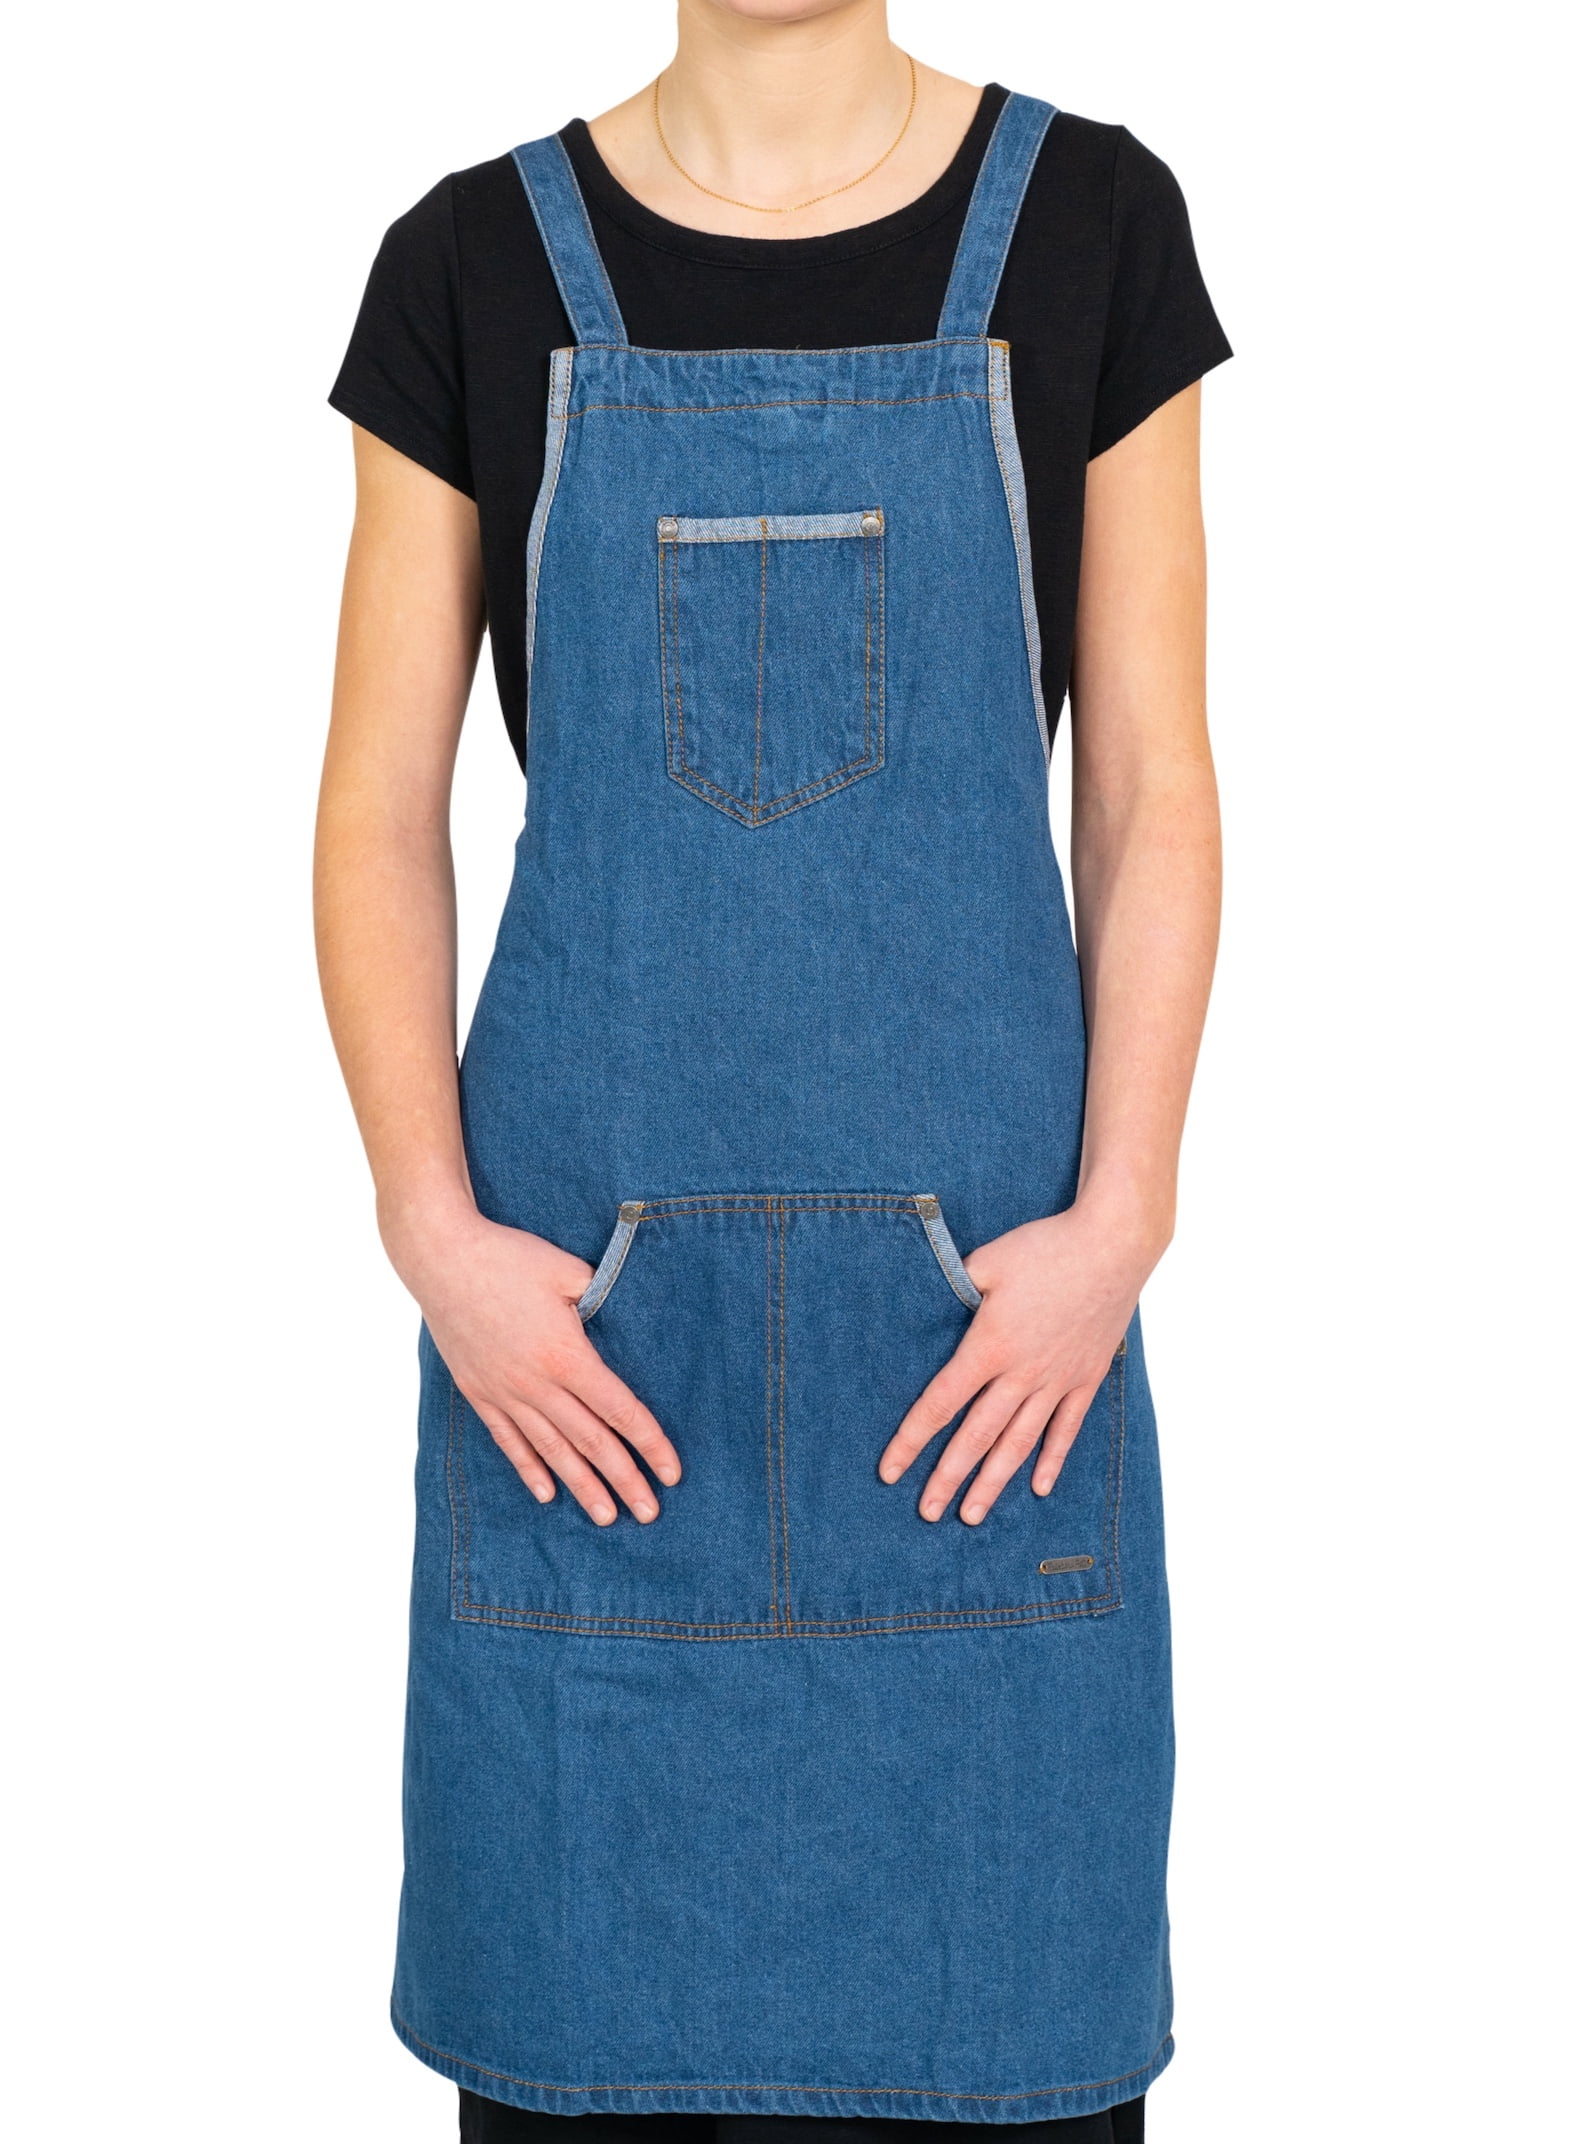 12 commercial grade navy blue denim apron with 1 pen and 1 hand pocket 